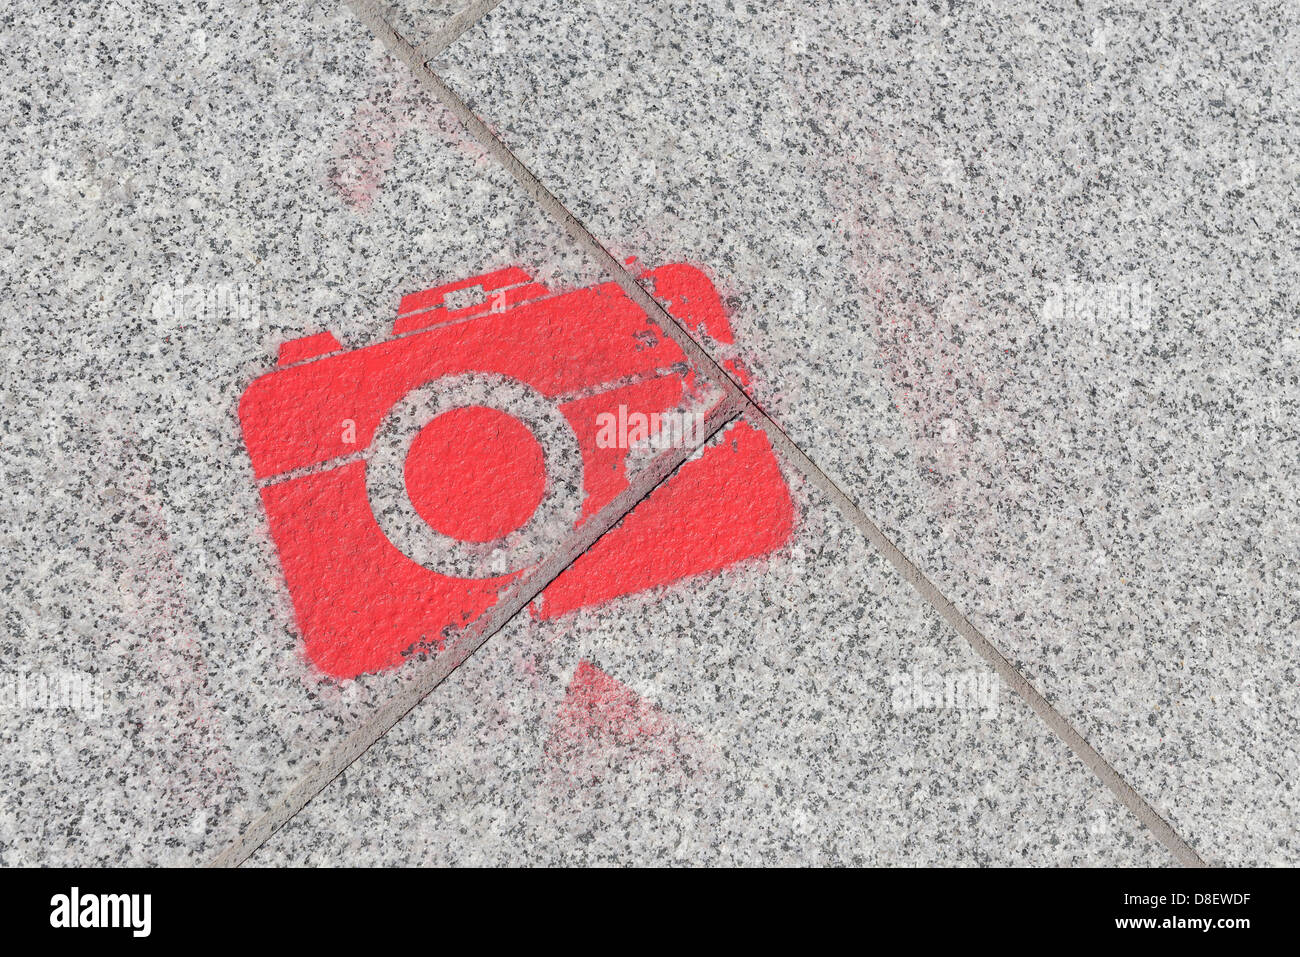 Camera shape spray painted to the pavement Stock Photo